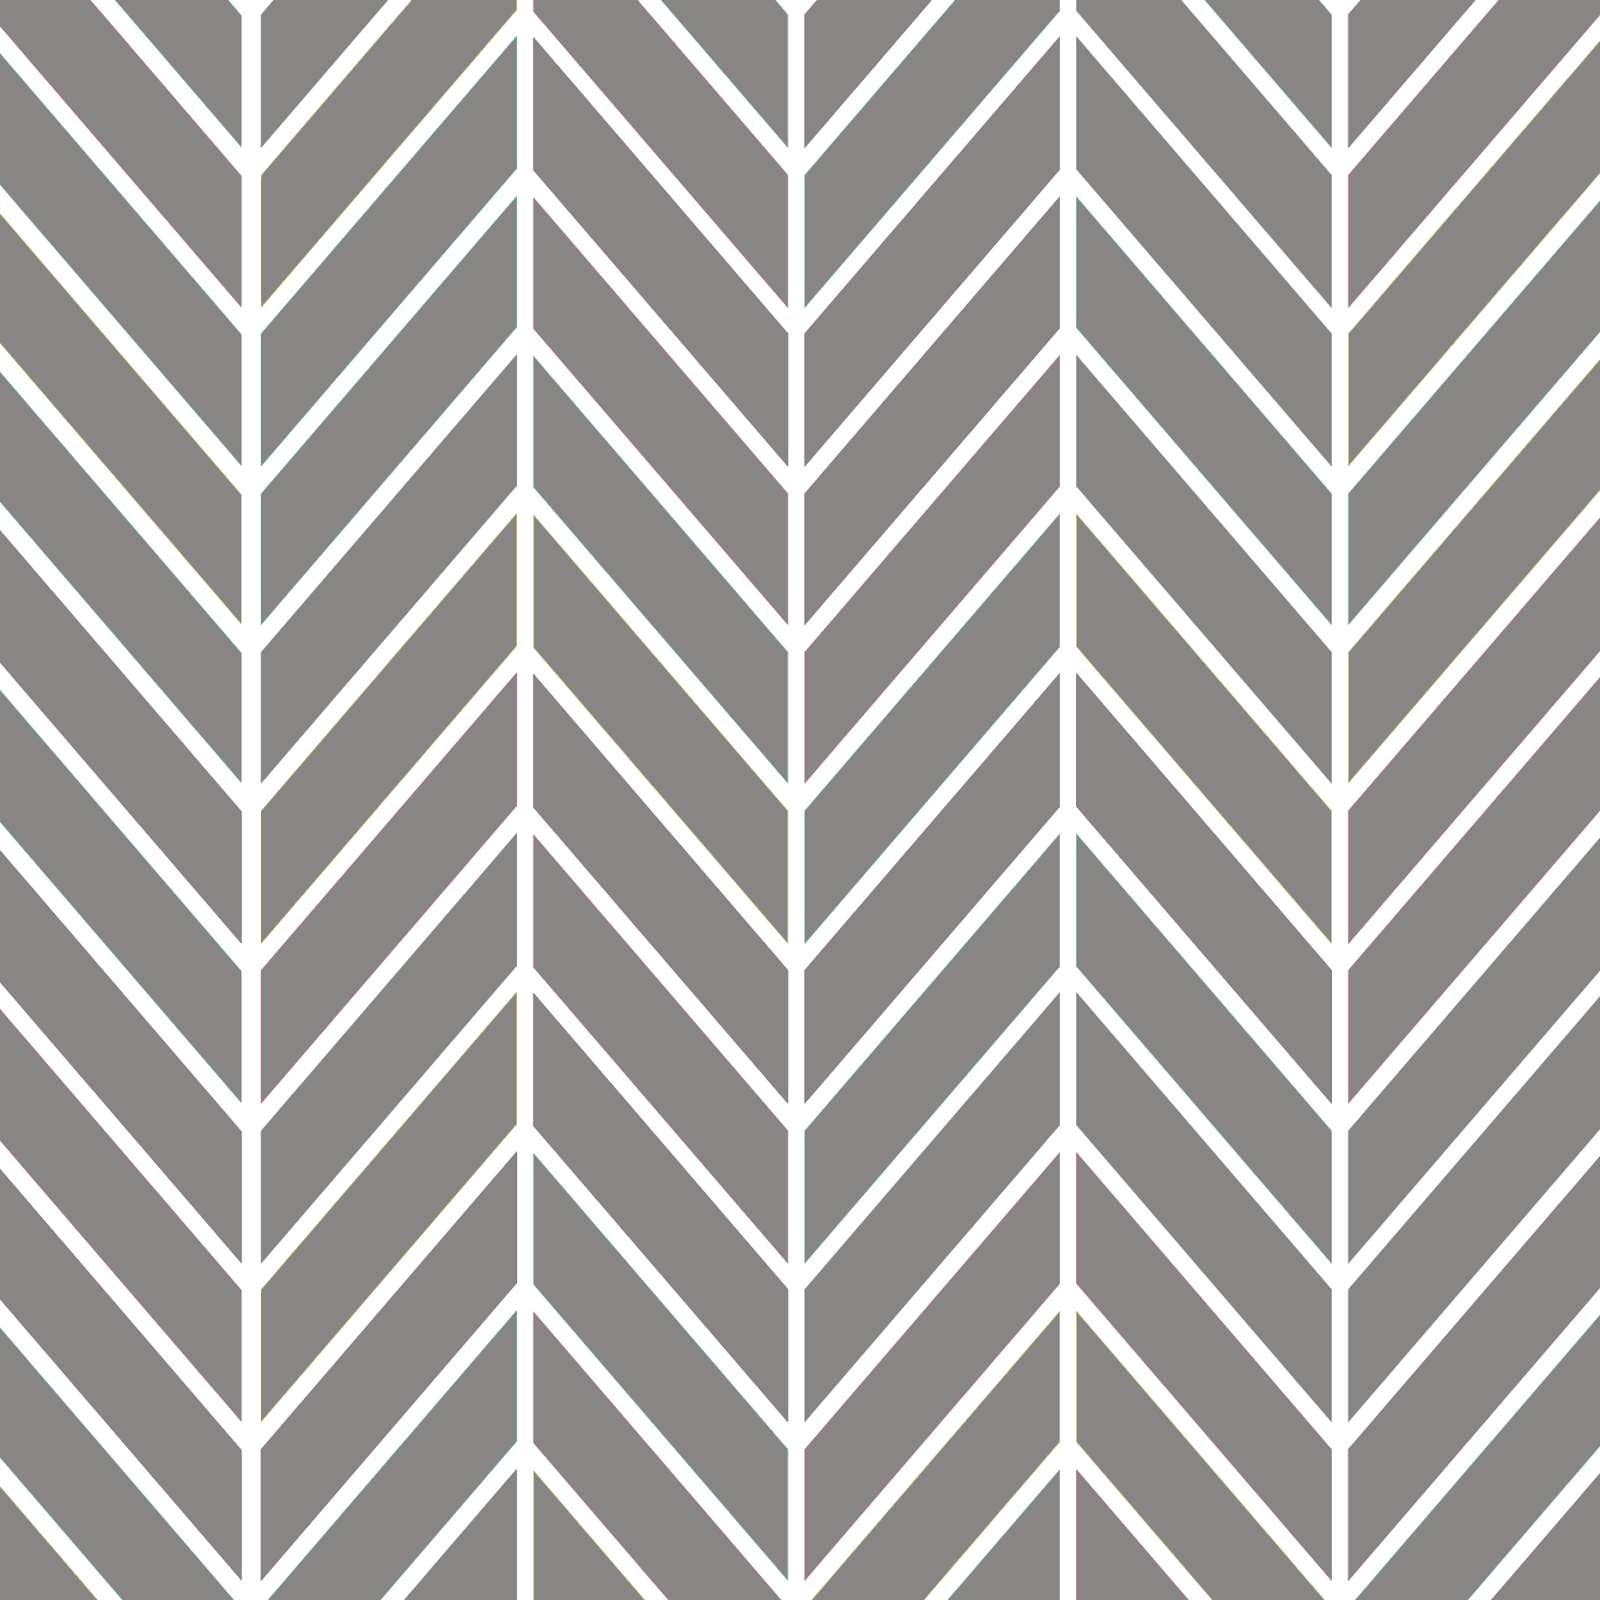 Gray And White Chevron Background Chevrons backgrounds